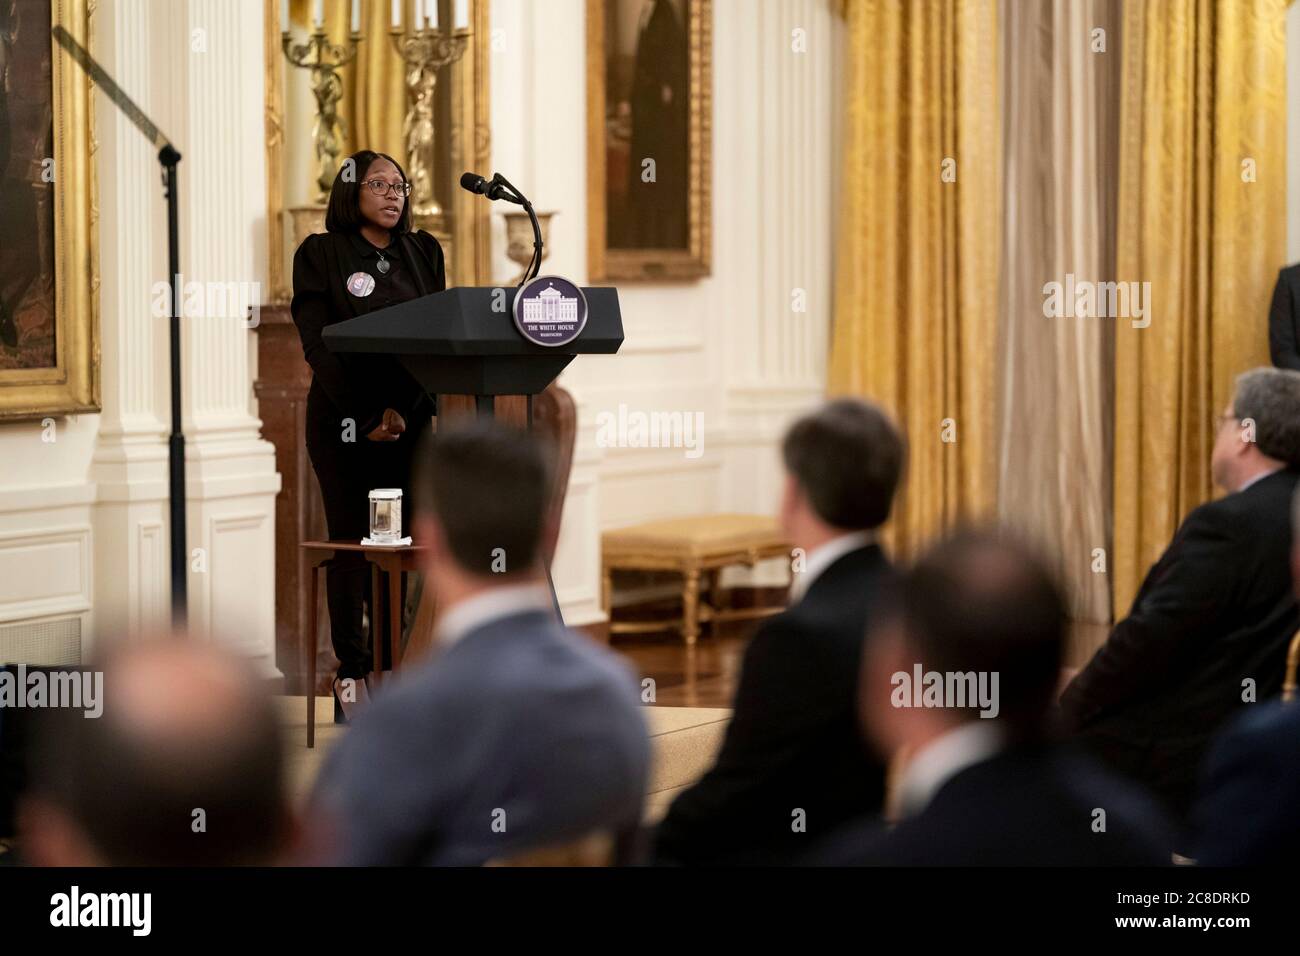 Washington, United States Of America. 22nd July, 2020. Washington, United States of America. 22 July, 2020. Charron Powell, mother of four-year-old LeGend Taliferro, killed by stray gunfire while sleeping speaks during the announcement of Operation Legend, to combat violent crime in the East Room of the White House July 22, 2020 in Washington, DC Trump plans to send federal law enforcement to cities around the country in what is widely viewed as an attempt to suppress Black Lives Matter protests. Credit: Tia Dufour/White House Photo/Alamy Live News Stock Photo